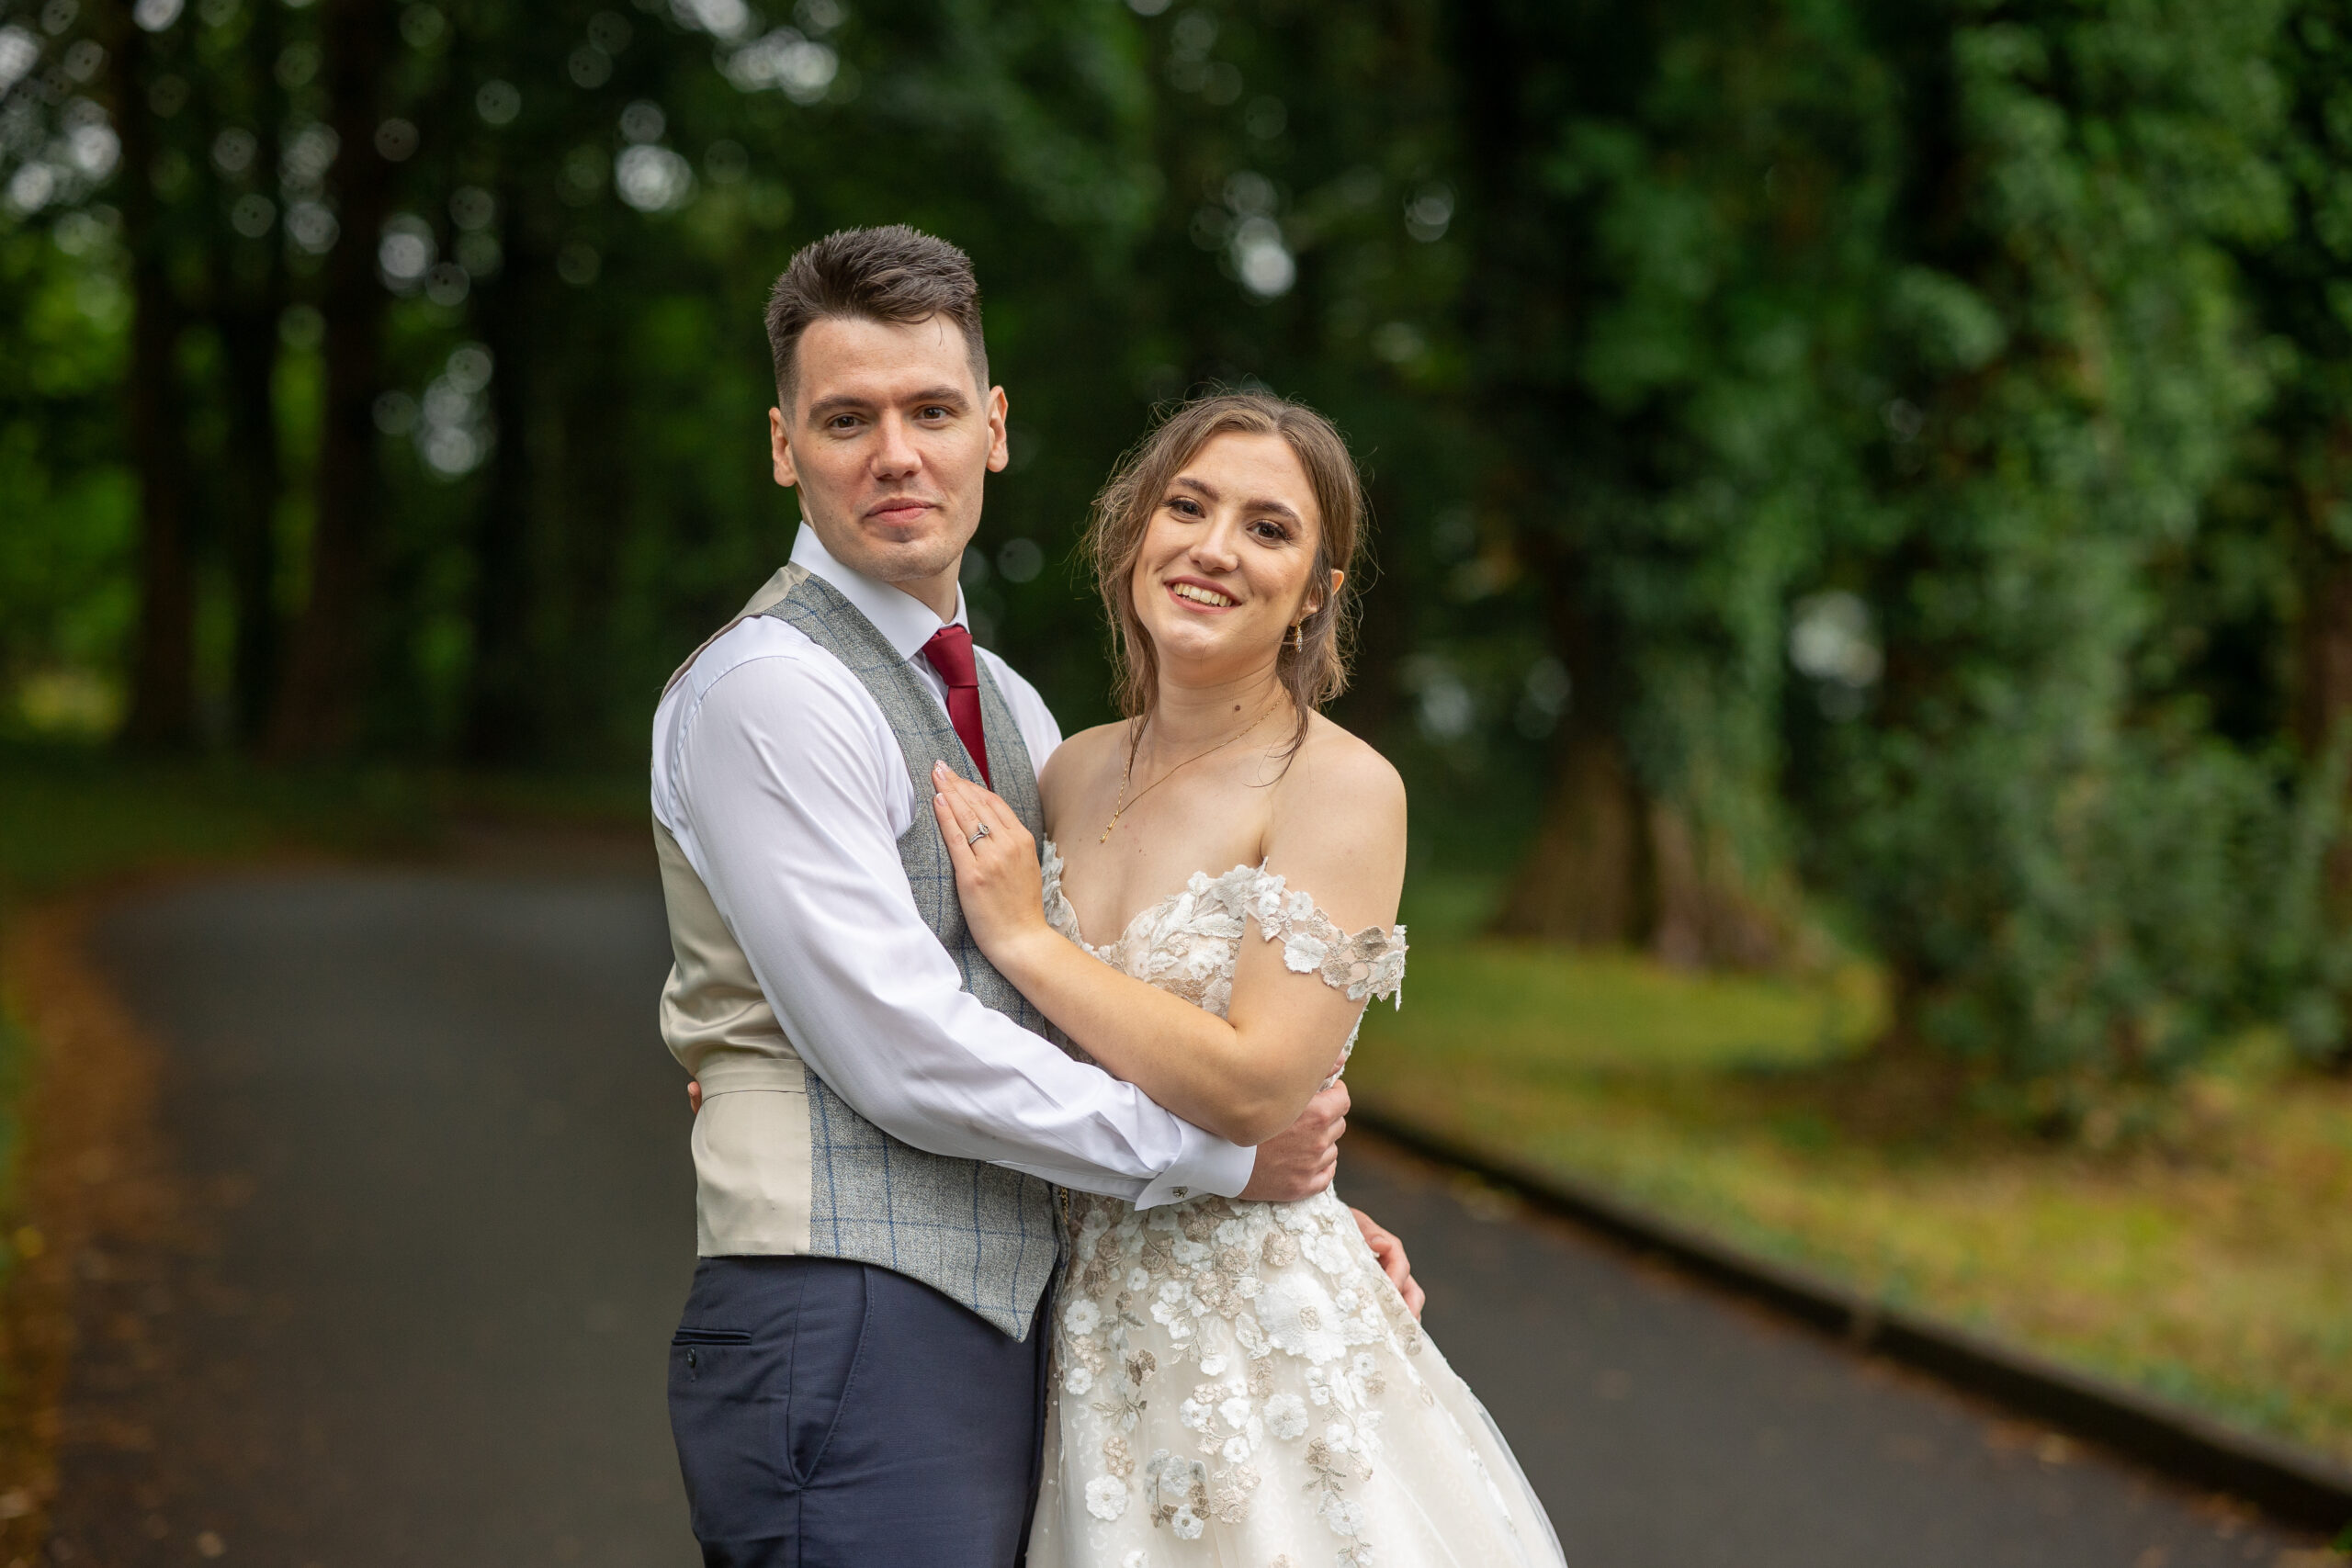 A South Wales wedding photographer captures a bride and groom posing in the woods.